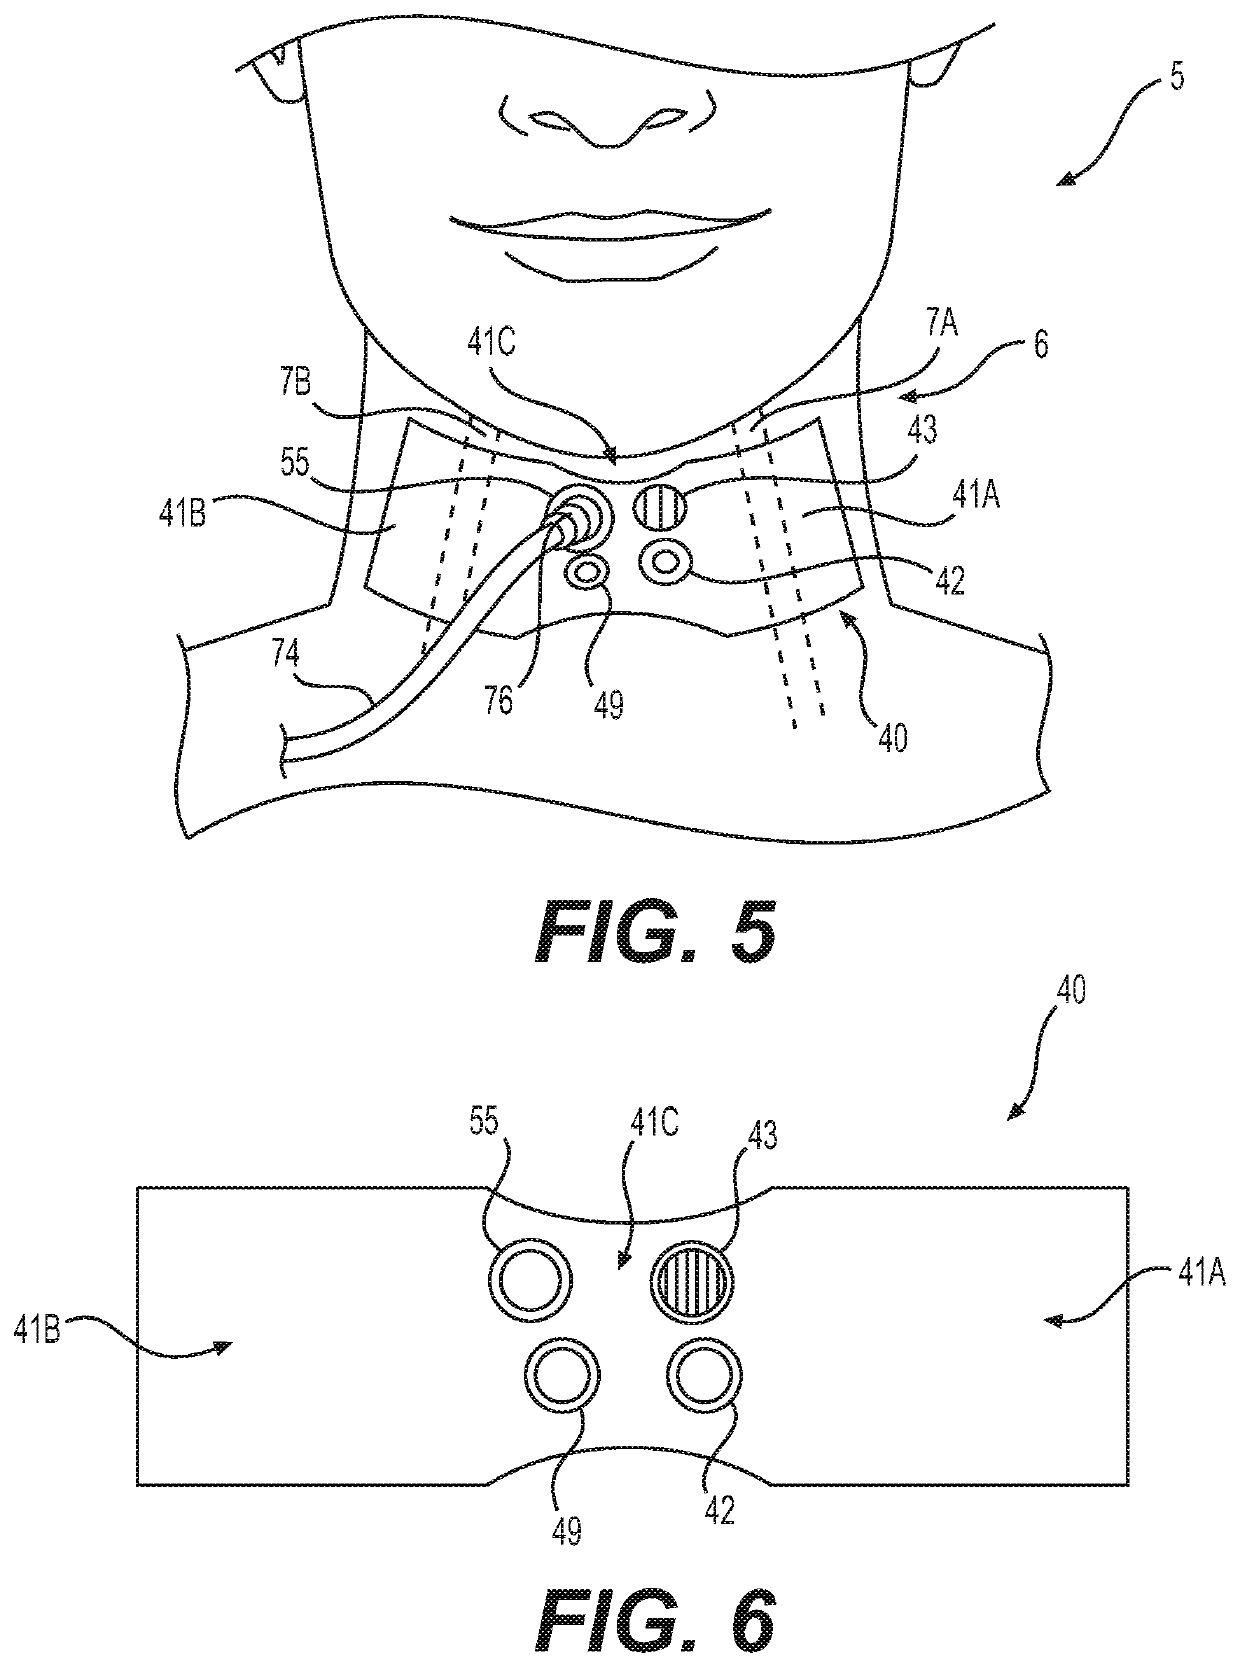 Stand-alone continuous cardiac doppler and acoustic pulse monitoring patch with integral visual and auditory alerts, and patch-display system and method